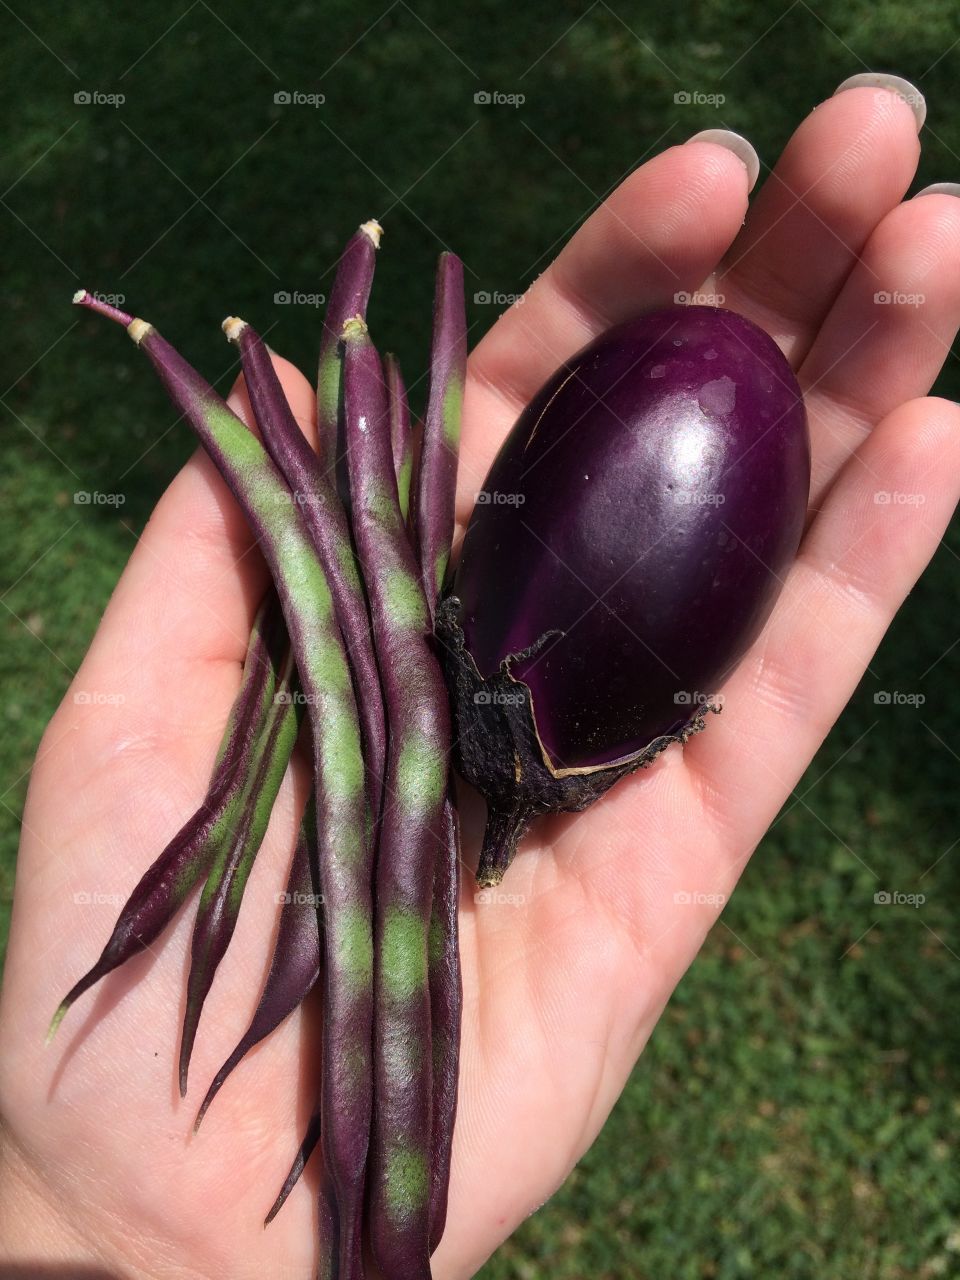 Queen beans and mini eggplant